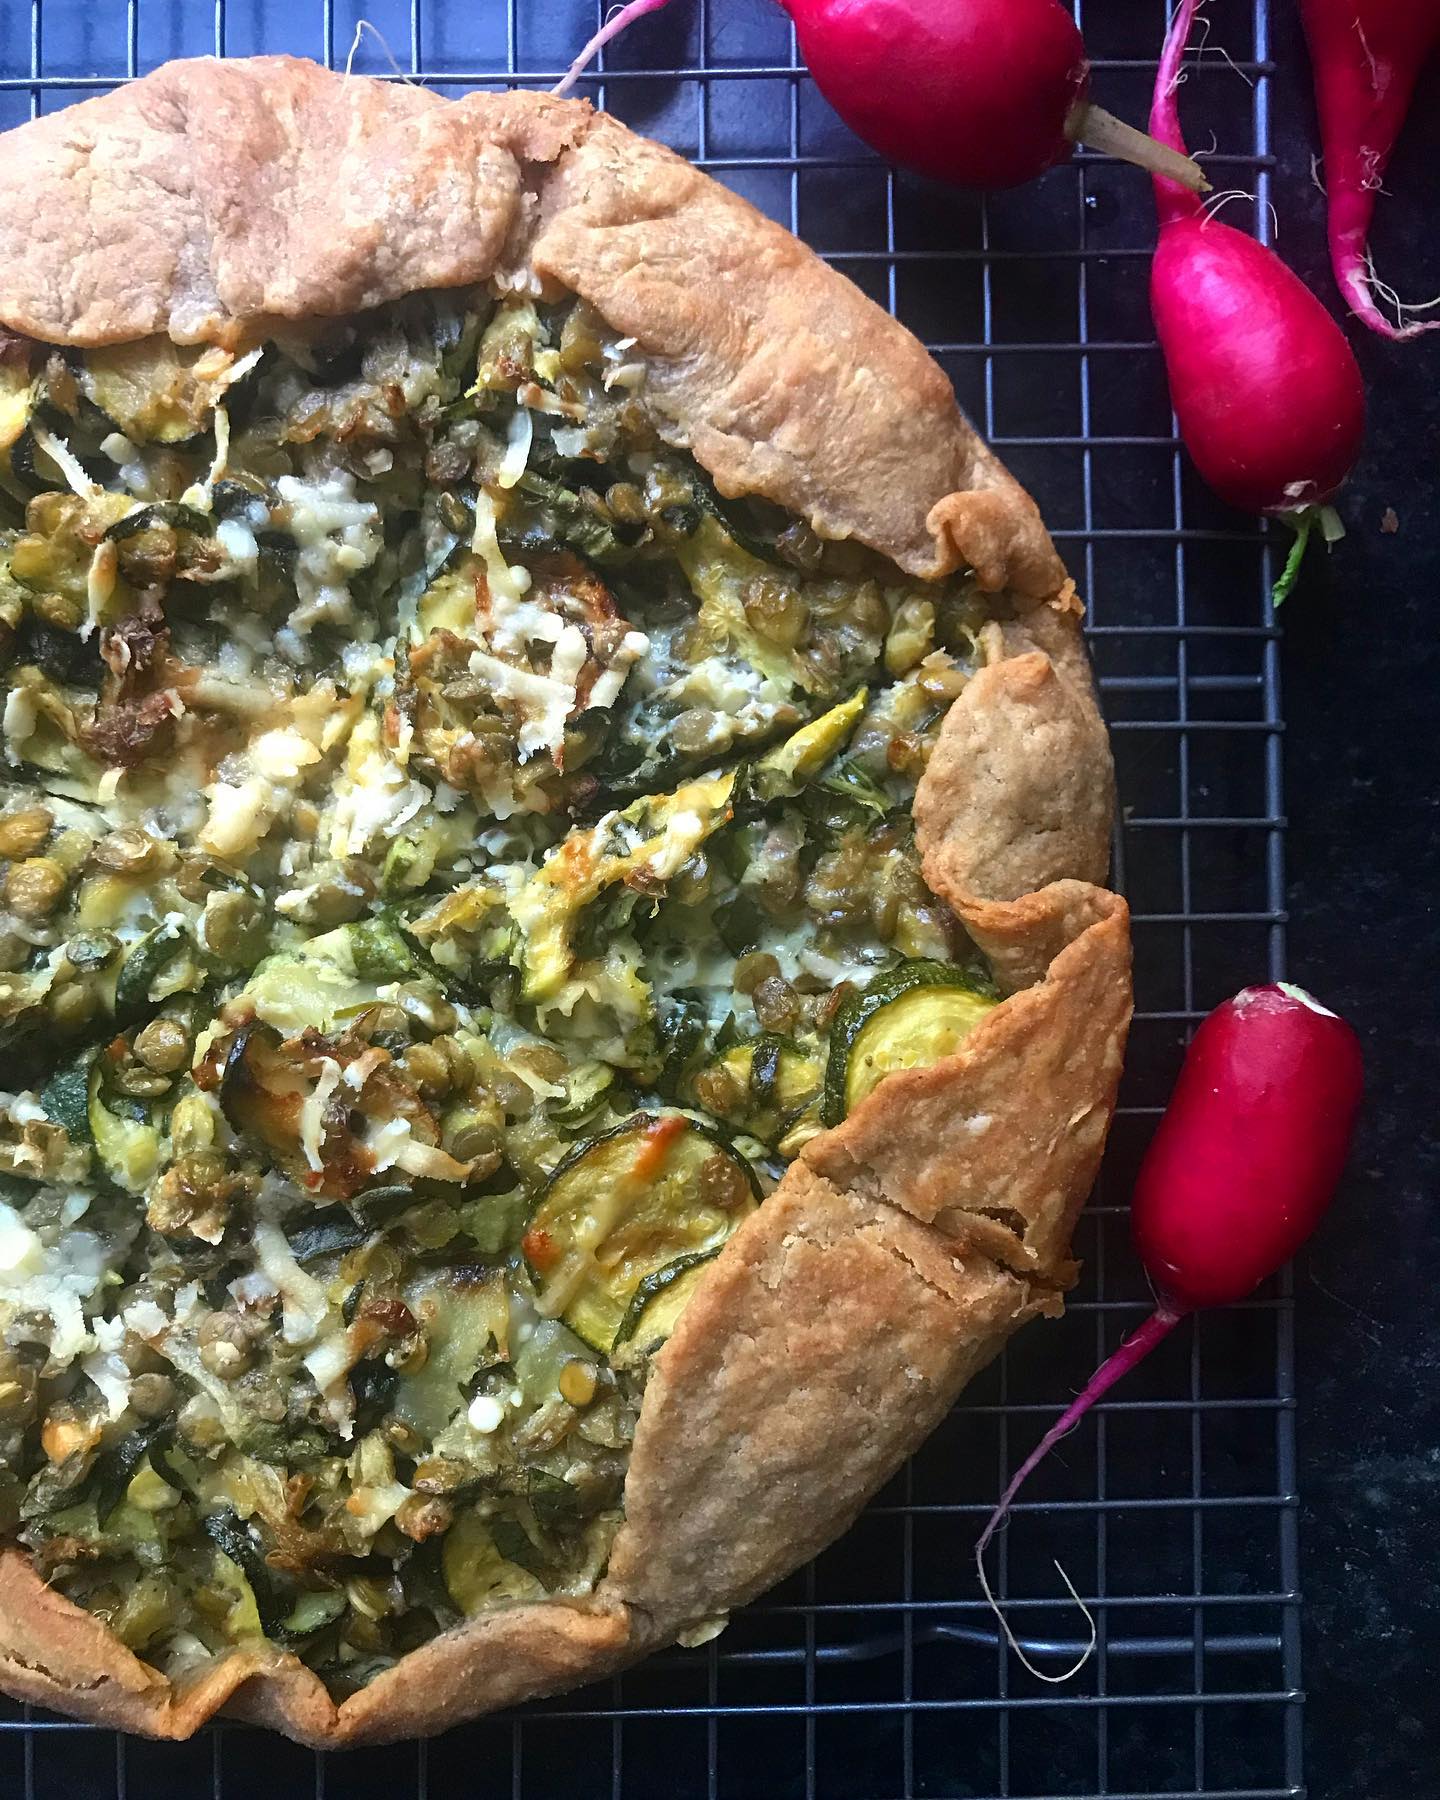 The zucchini galette recipe on my site is super versatile. I was out of feta and low on zucchini so I filled it in with cooked green lentils and loads of Parmesan and basil. You can’t go wrong when you stuff vegetables into buttery pastry. 
.
.
#eatmoreveggies #vegetariansupper #eatmoreplants #lentilsgowitheverything